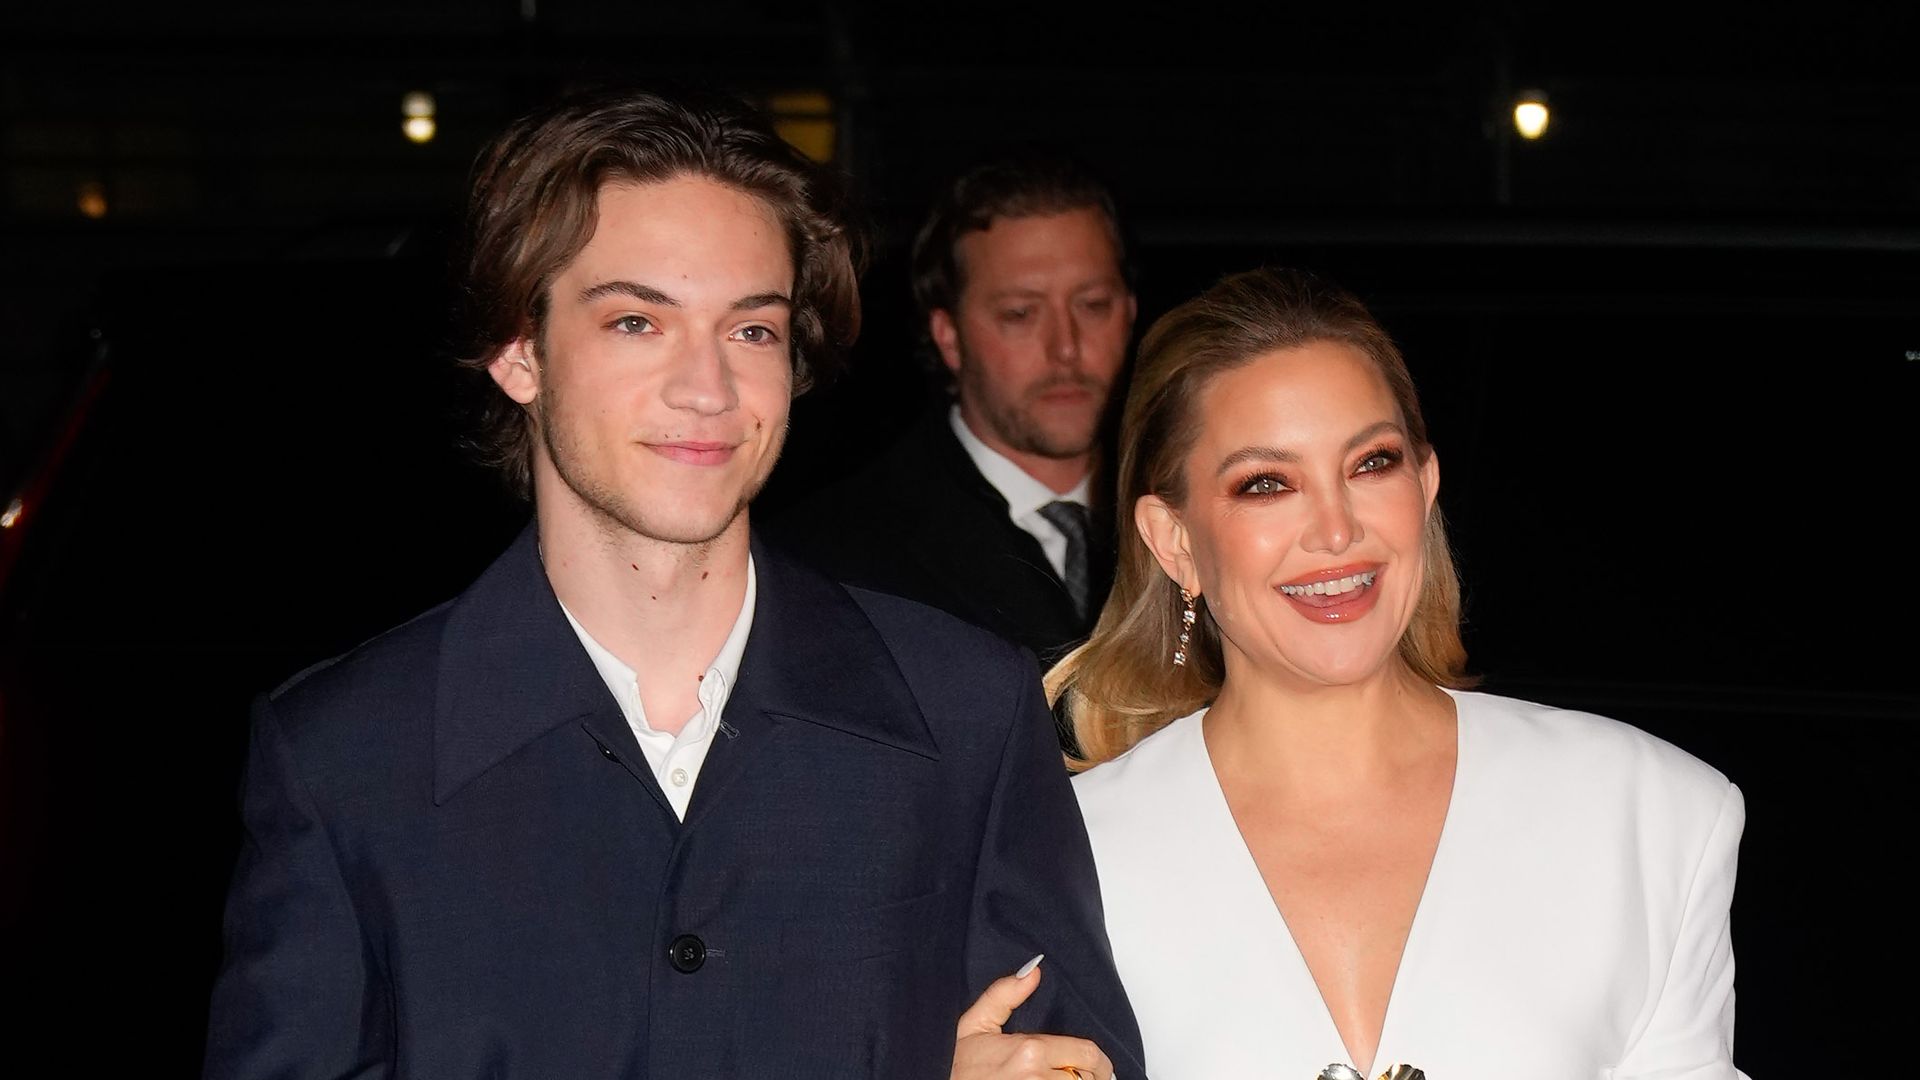 Kate Hudson reflects on 'wild' realization son Ryder, 20, is three years away from age she became a mom